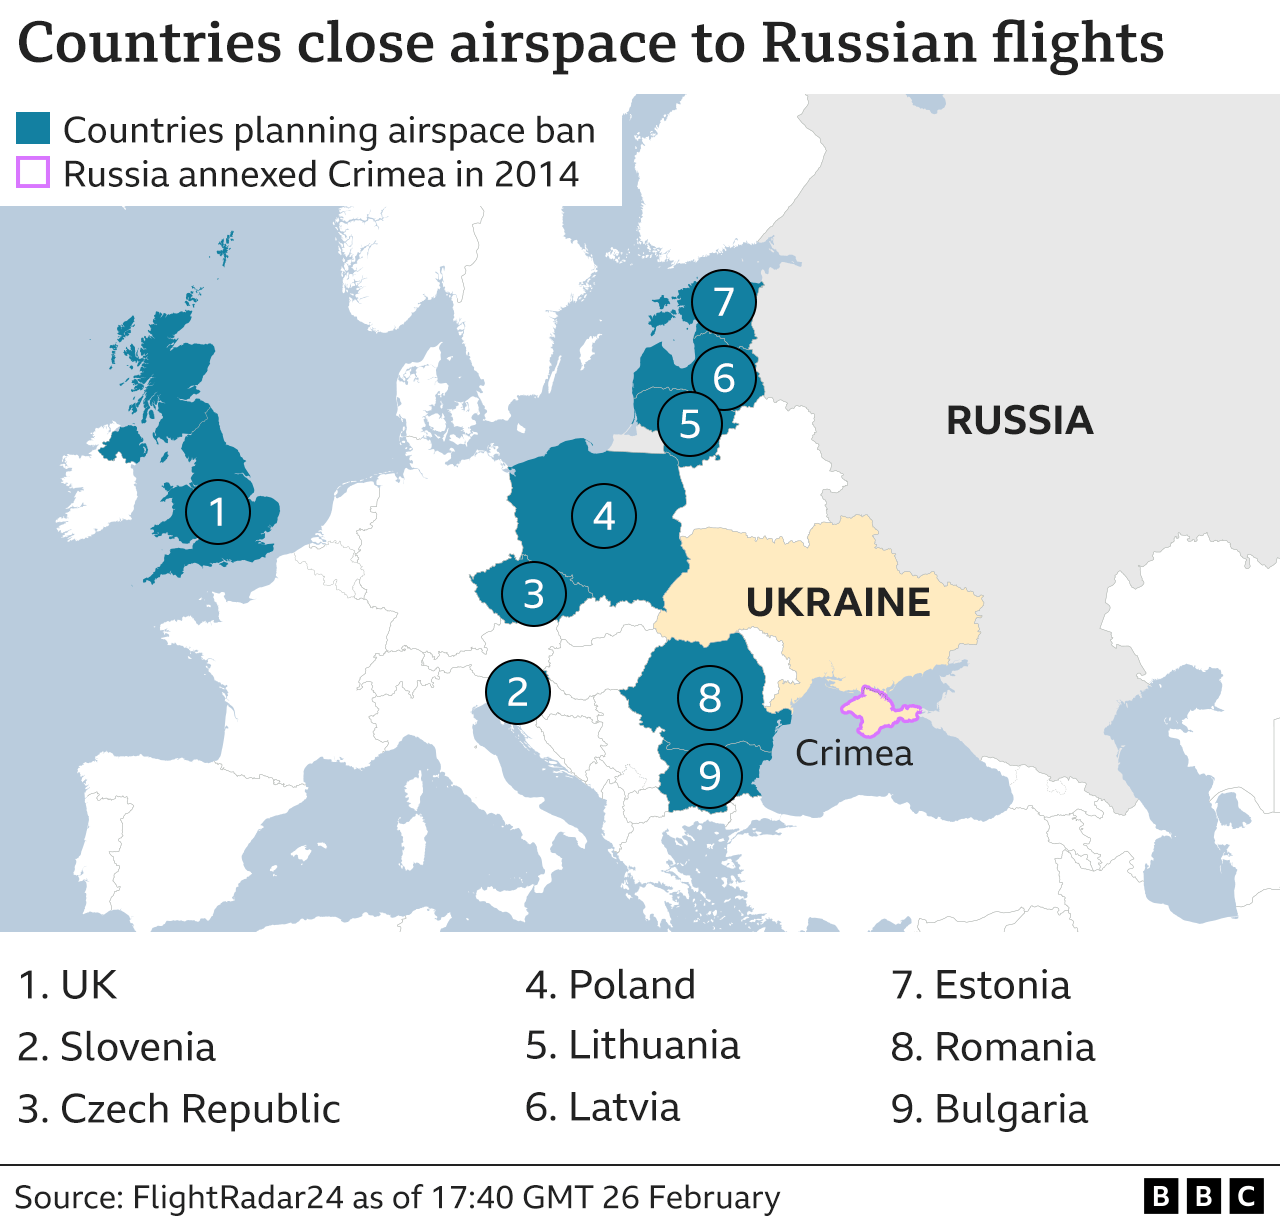 BBC graphic showing nations which have closed airspace